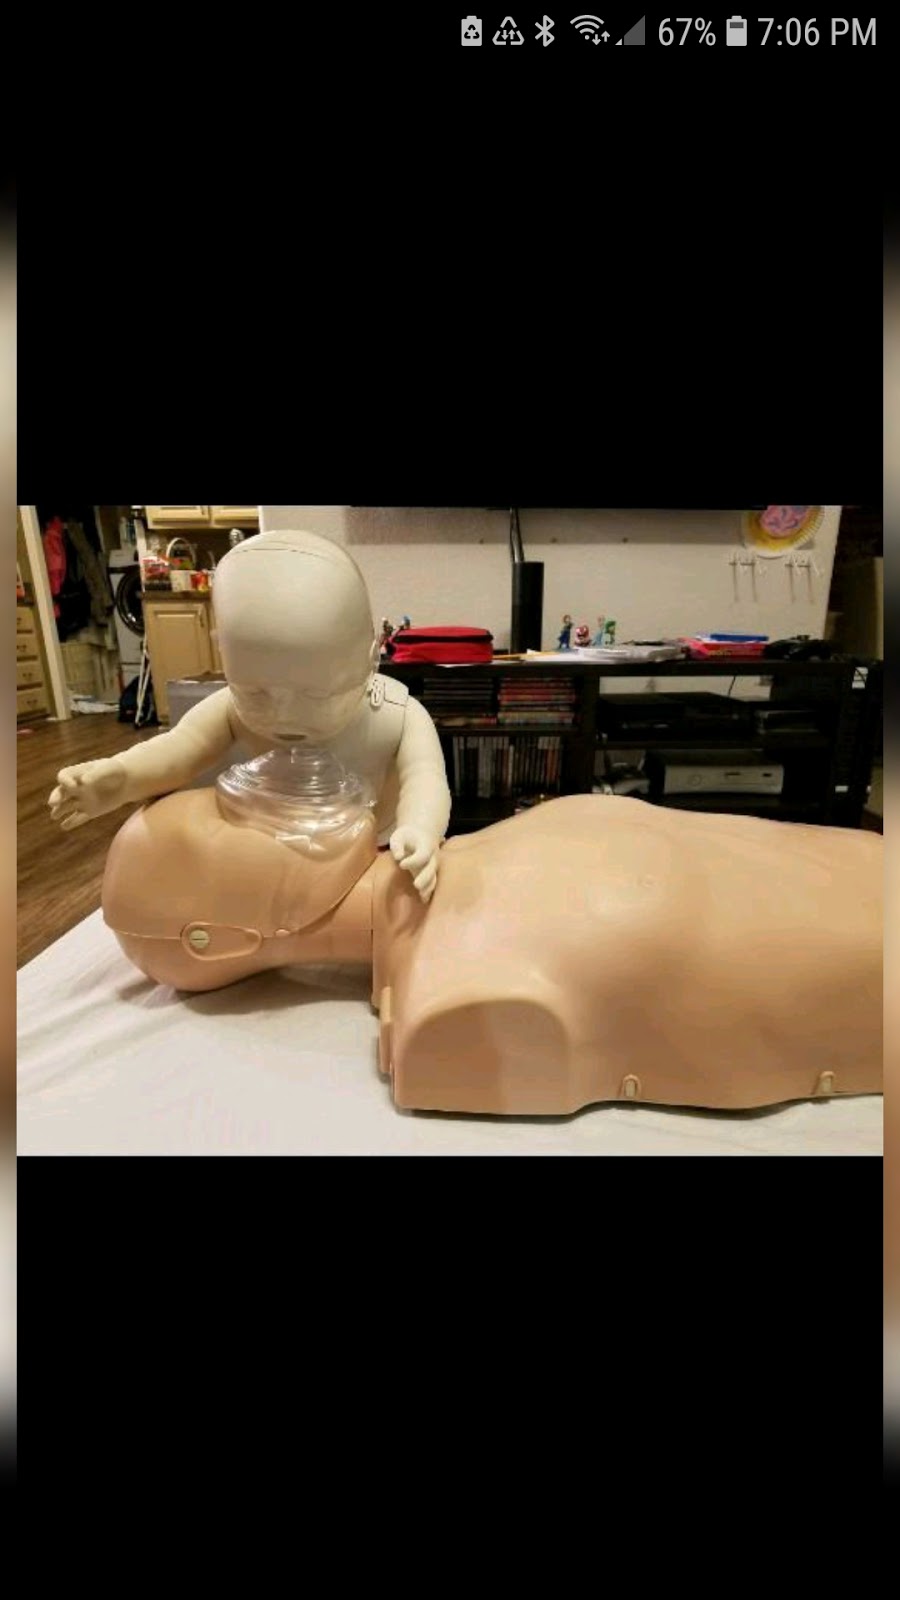 One Life CPR | 33302 Santiago Rd, Acton, CA 93510, USA | Phone: (661) 388-3555